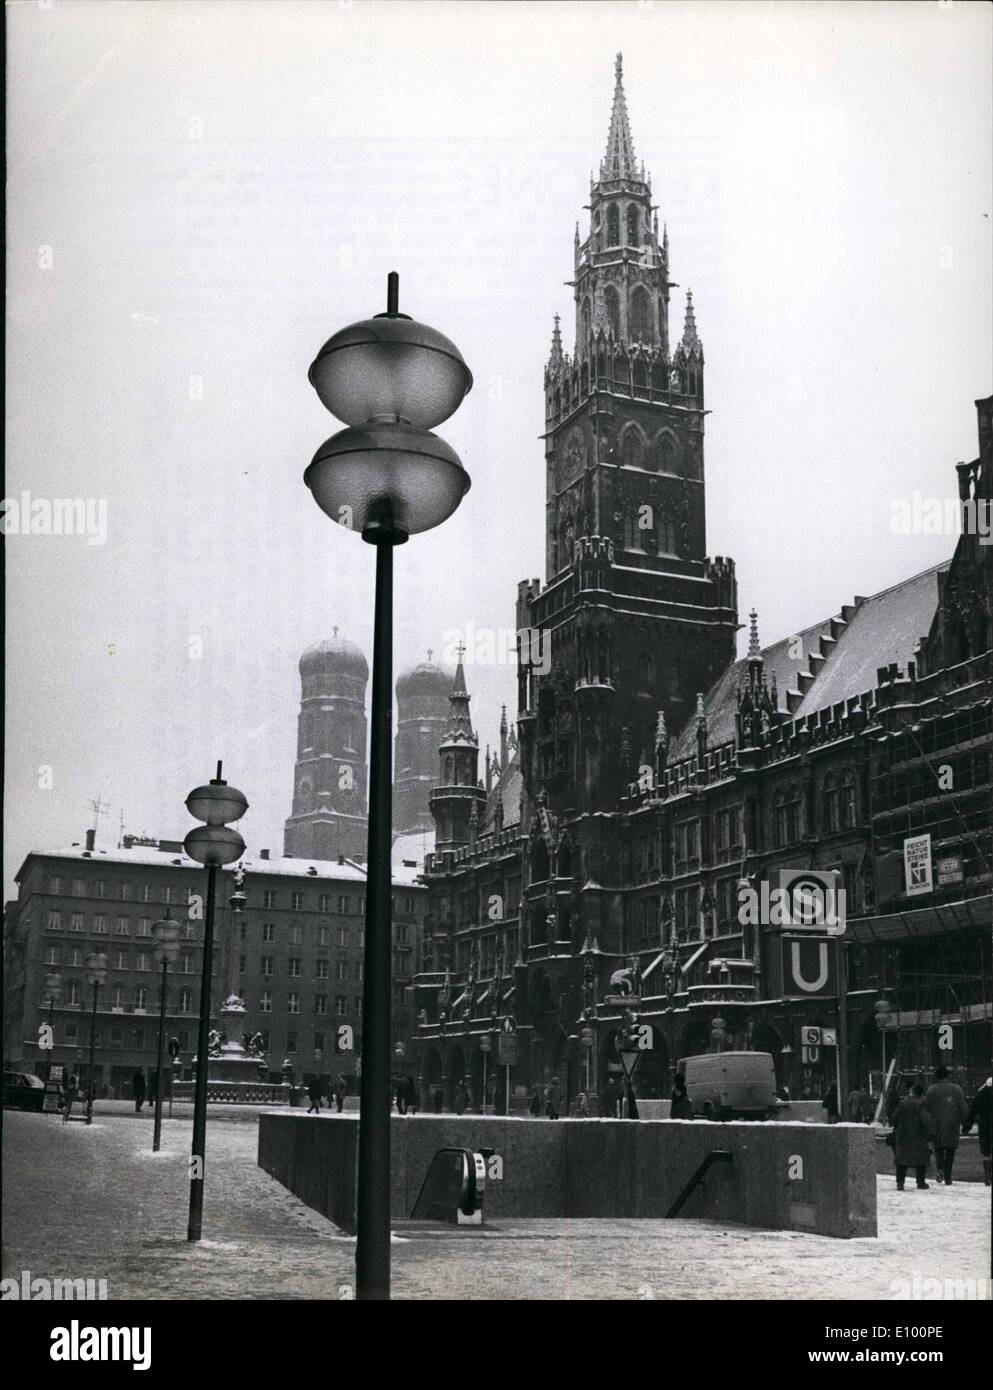 Feb. 02, 1972 - Olympic City Munich. Photo shows the Marienplatz in the centre of Munich always has been a landmark. Today the place is a cross point of the underground lines which were built for the Olympics 1972 and the centre of a systems of pedestrian ways which will reach out to parts of the shopping streets of the historical city centre. The Marienplatz with the gotic town hall, behind which the towers of the Frauenkirche can be seen is one of the most visited places in the Olympic City Stock Photo